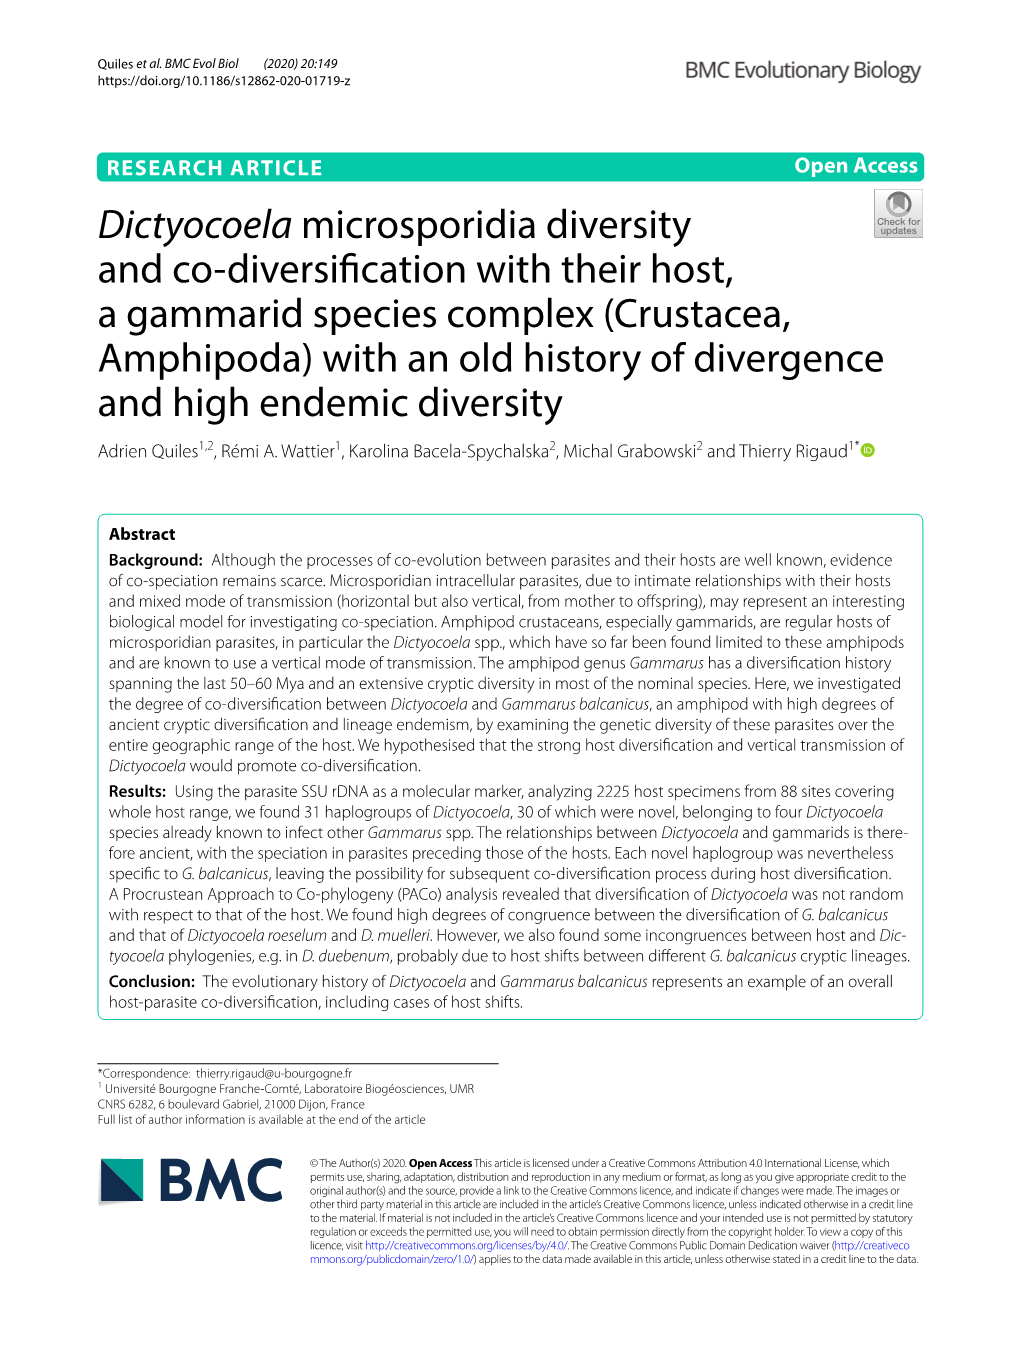 Dictyocoela Microsporidia Diversity and Co-Diversification with Their Host, a Gammarid Species Complex (Crustacea, Amphipoda)